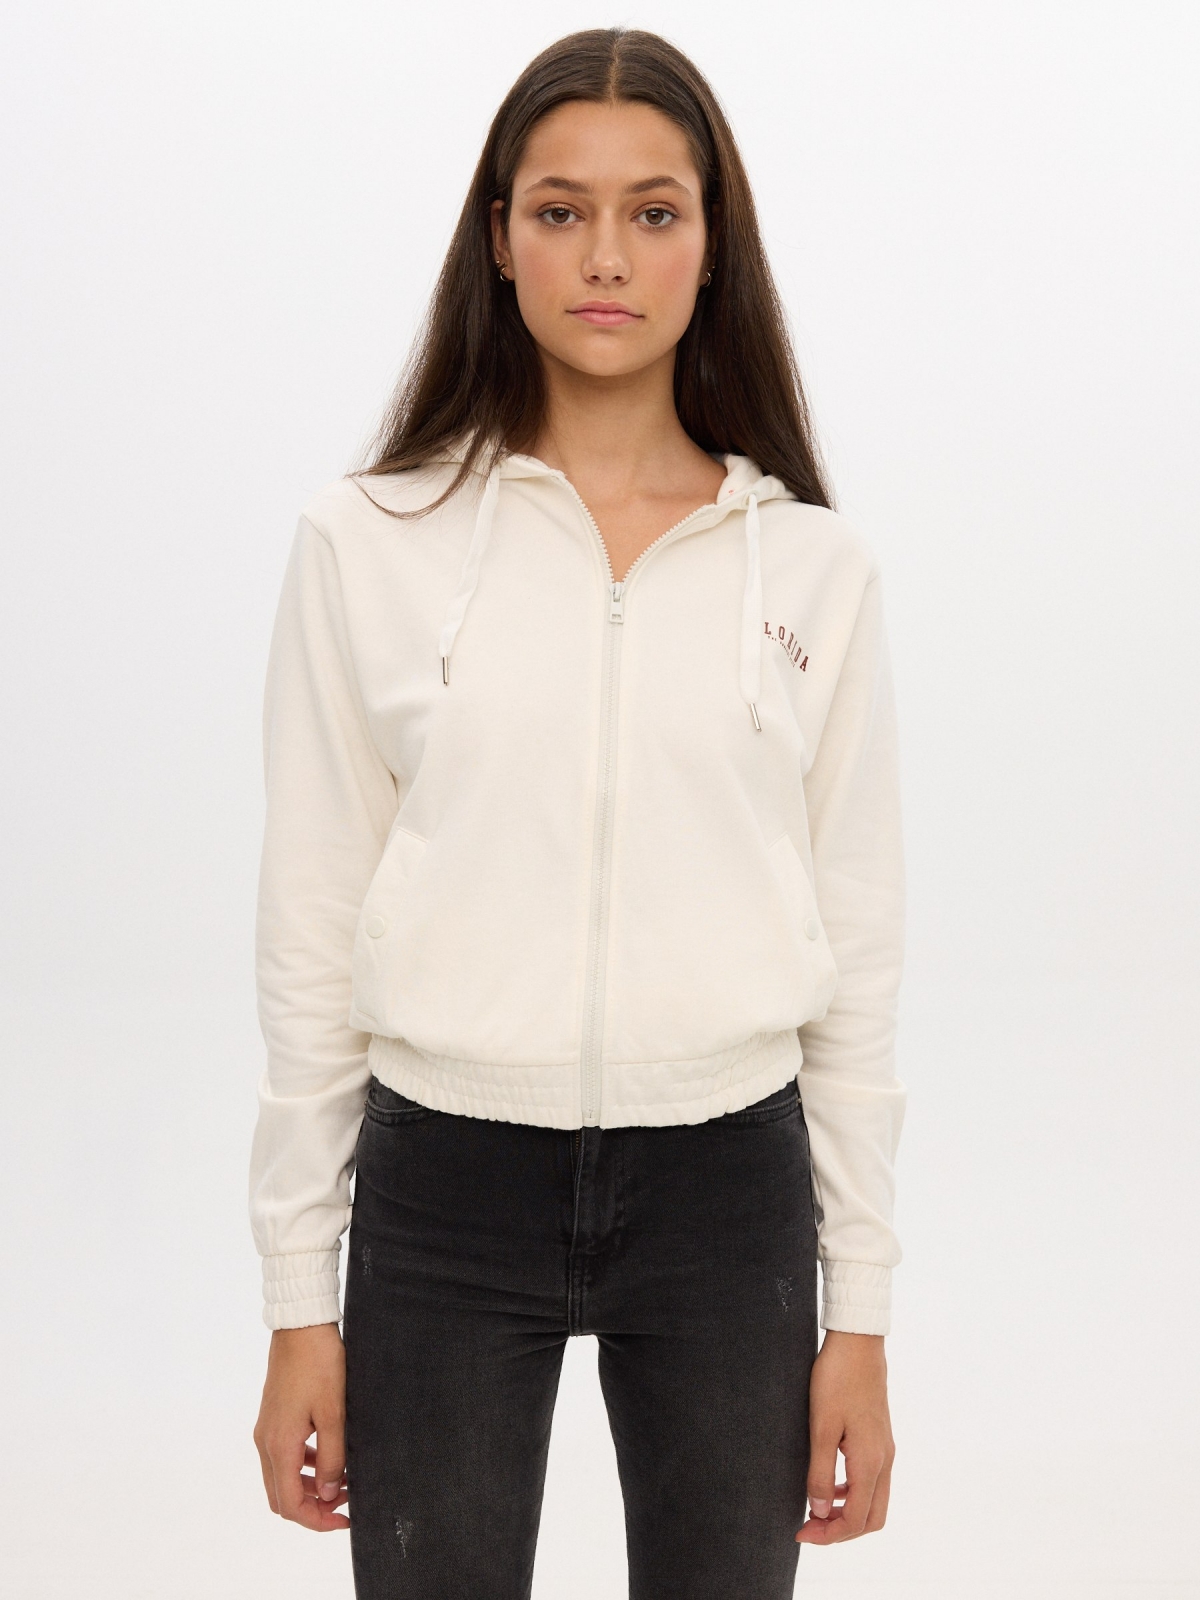 Open hooded sweatshirt off white middle front view